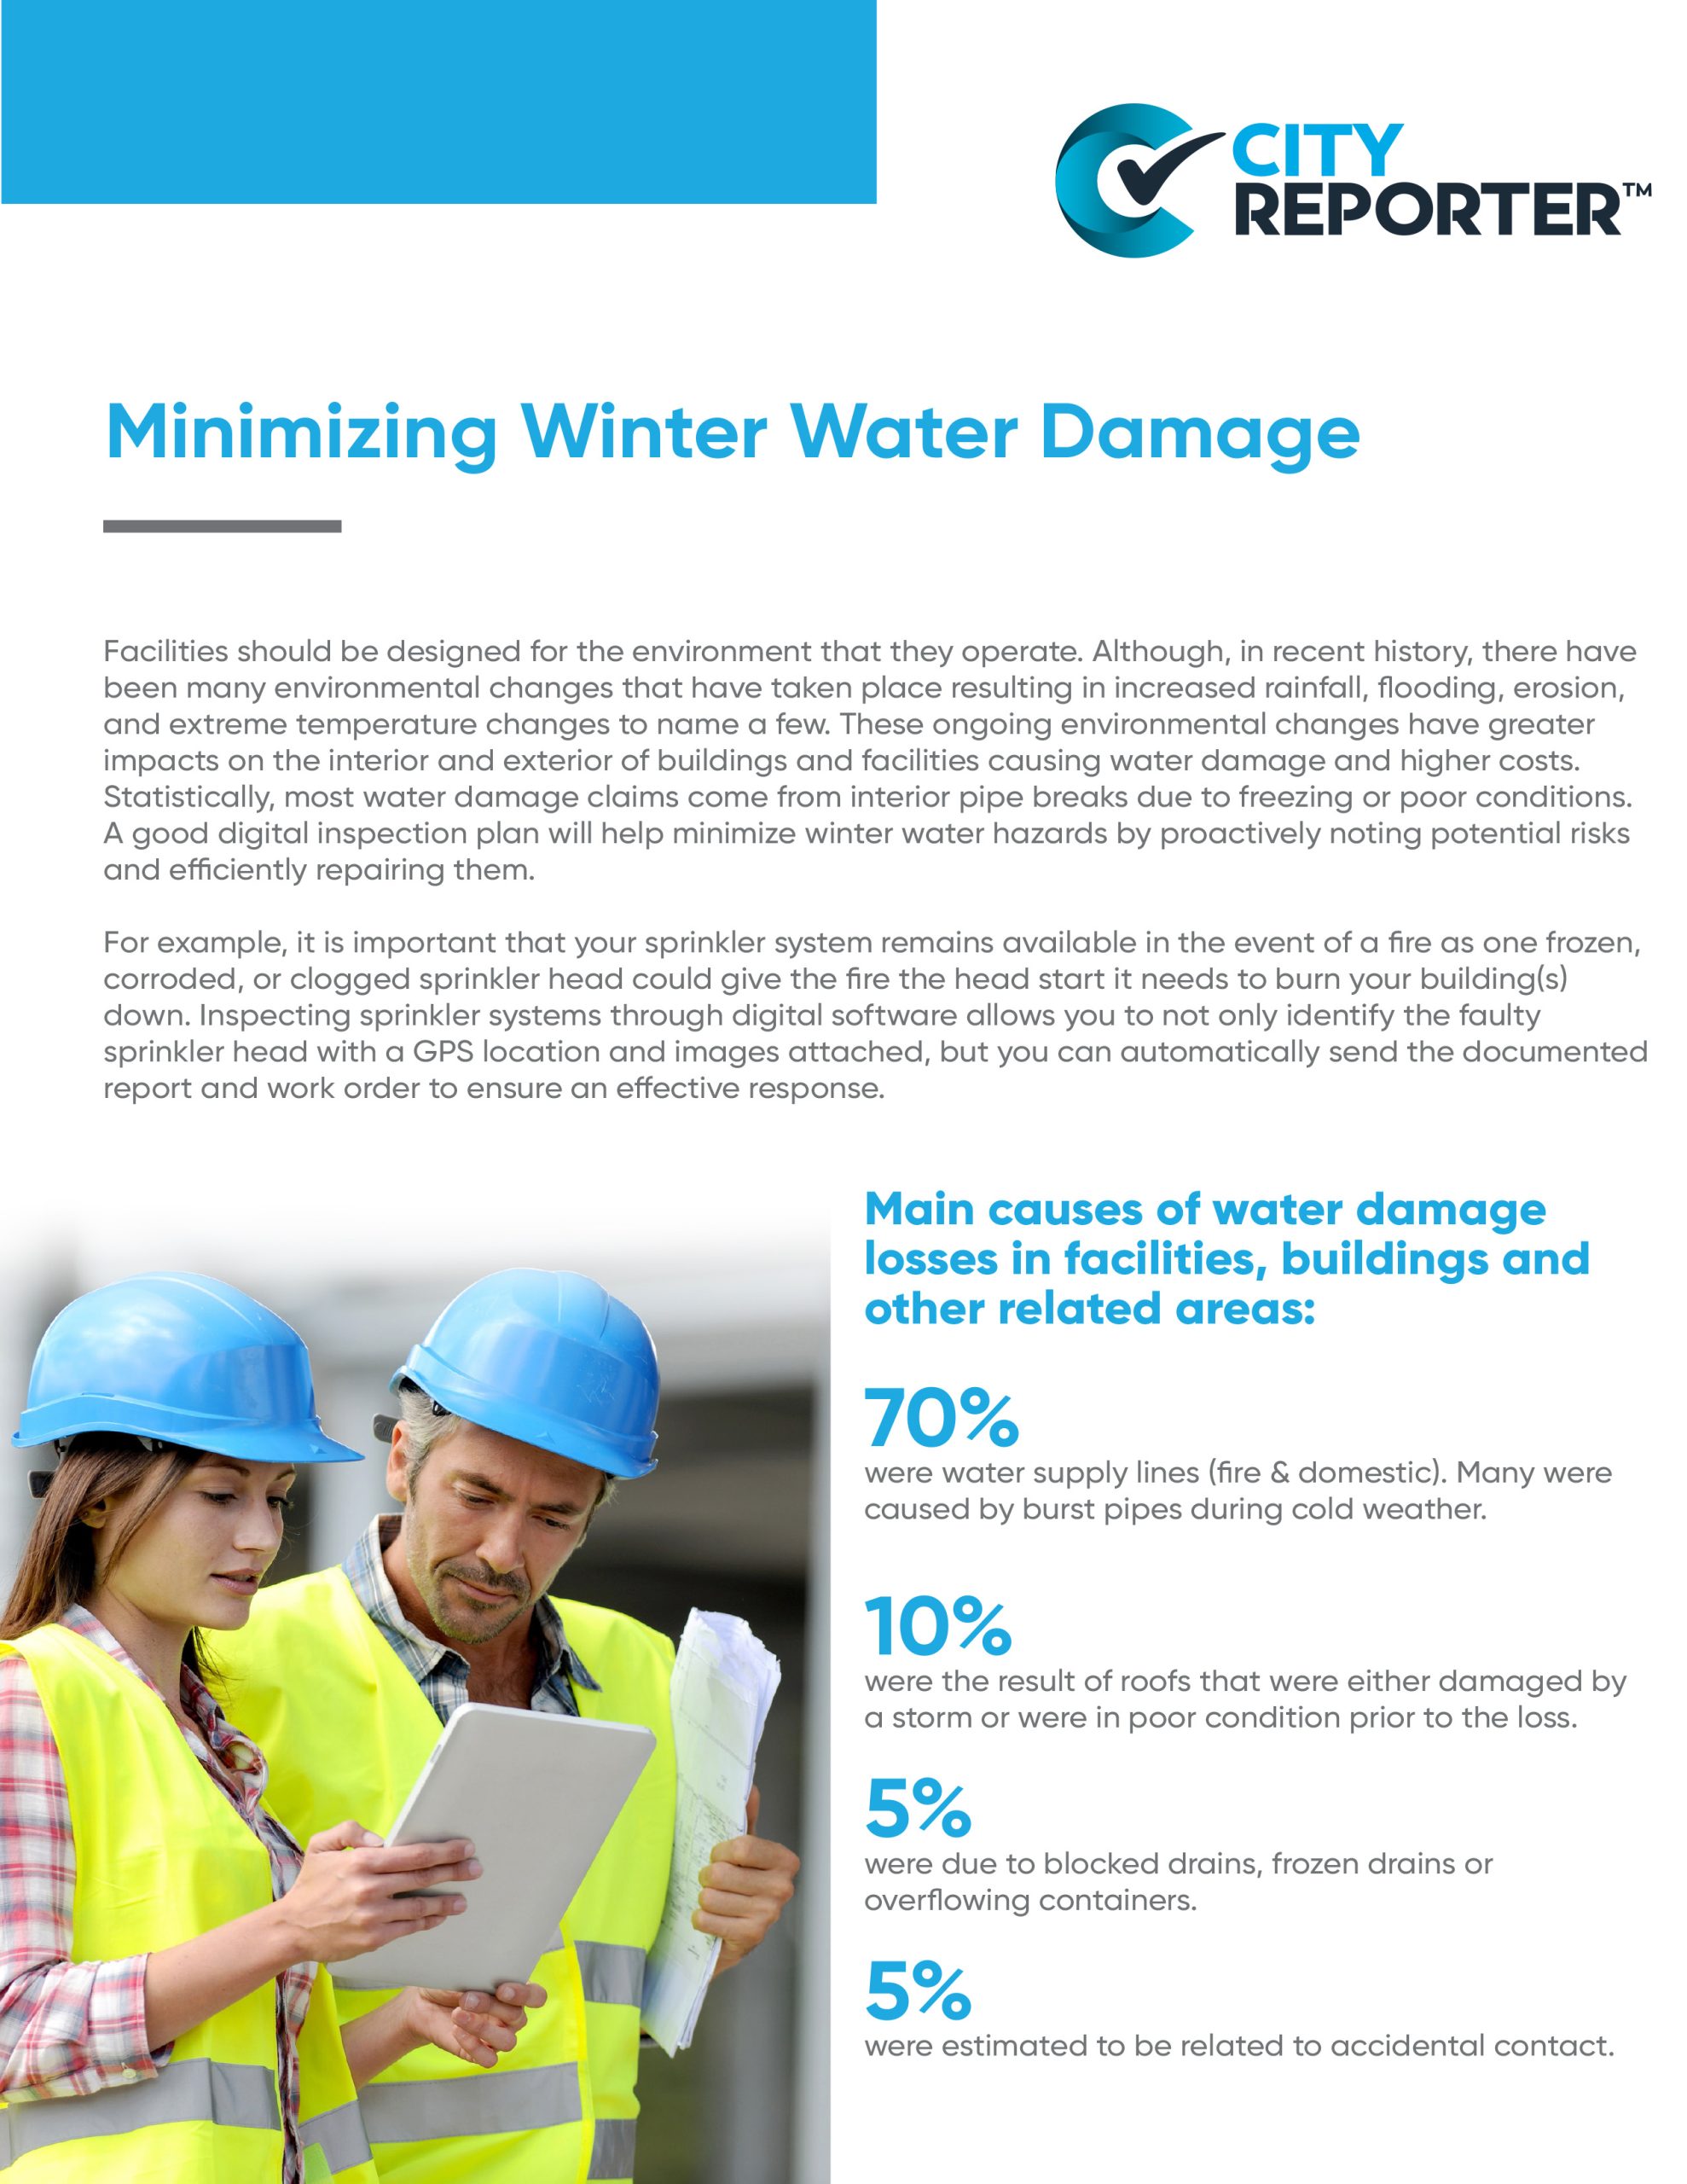 The first page of CityReporter's document - Minimizing Winter water Damage